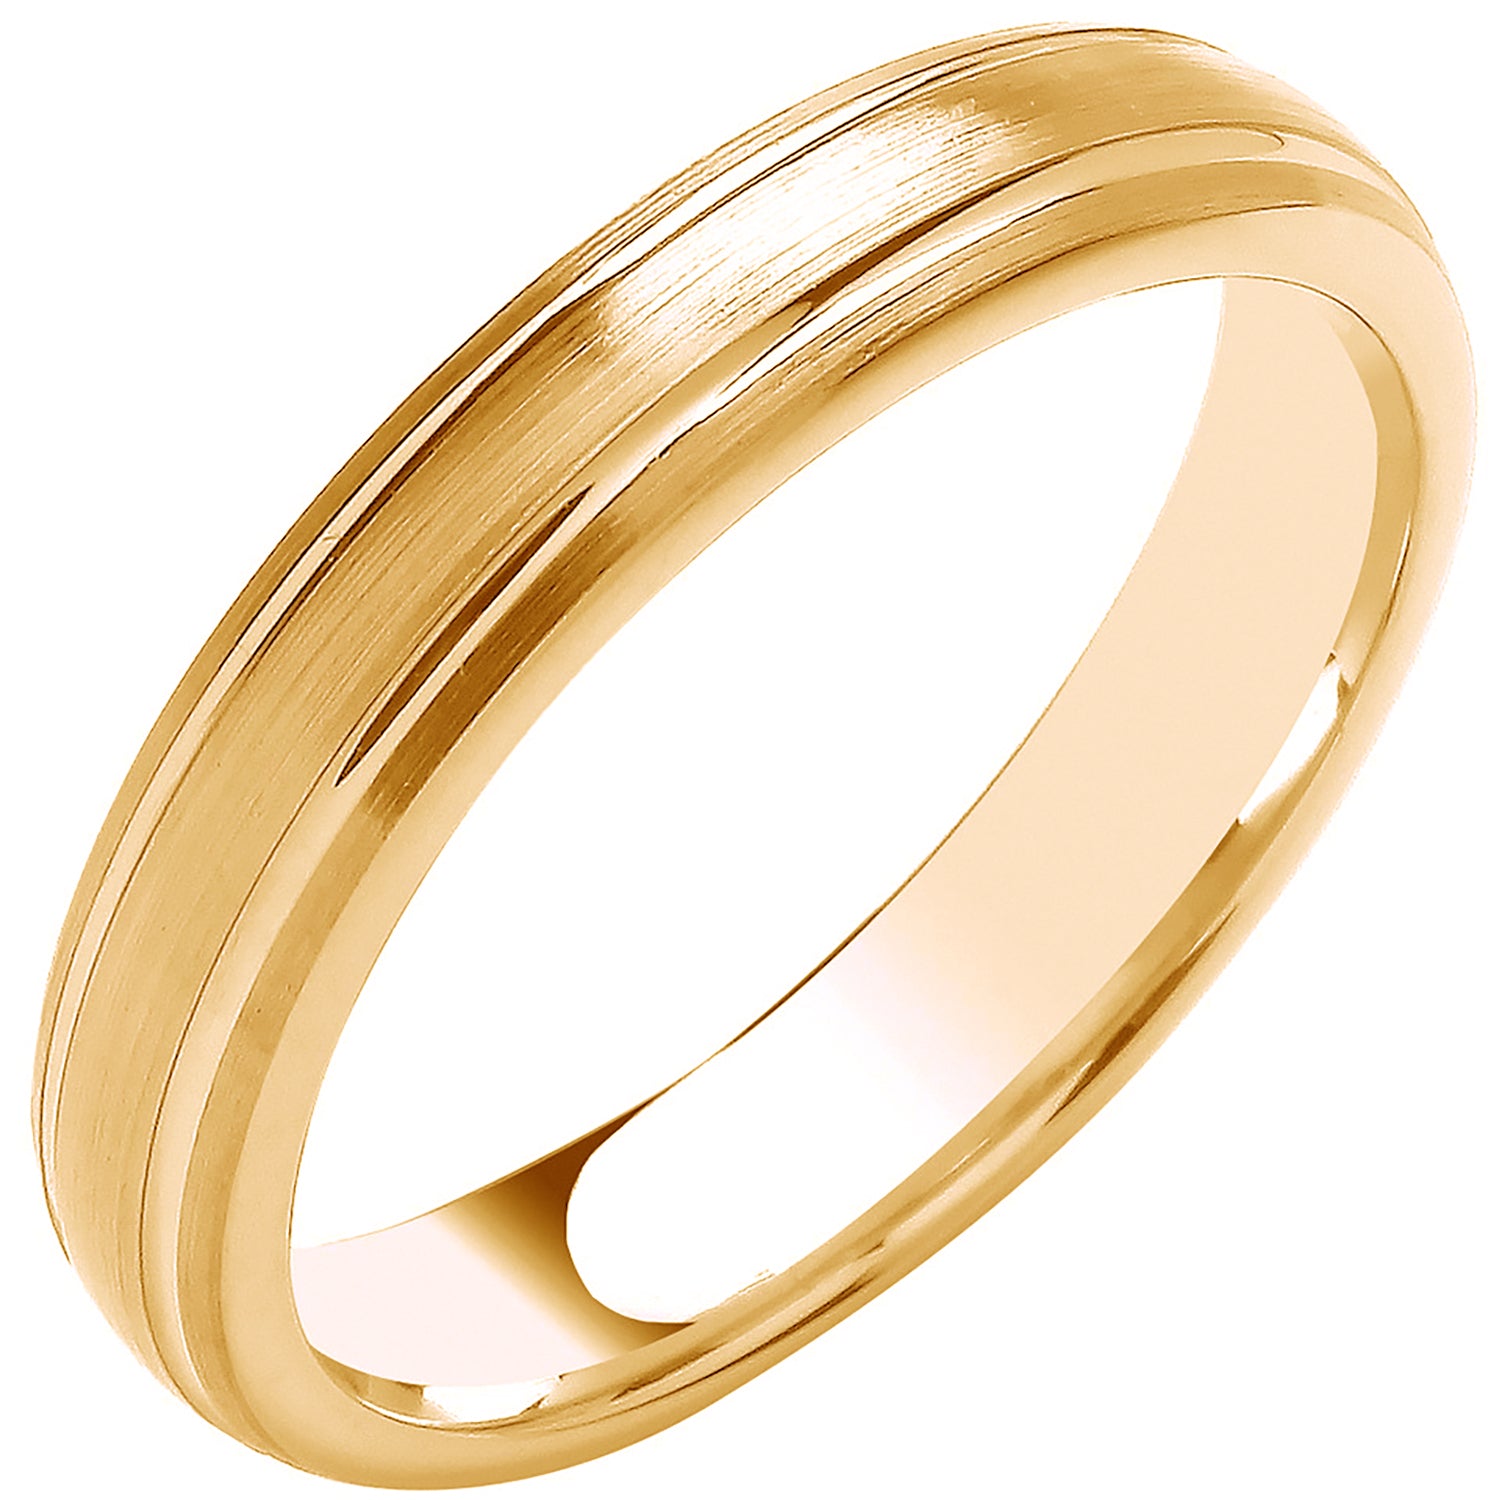 4mm Traditional Court Track Edges Wedding Band